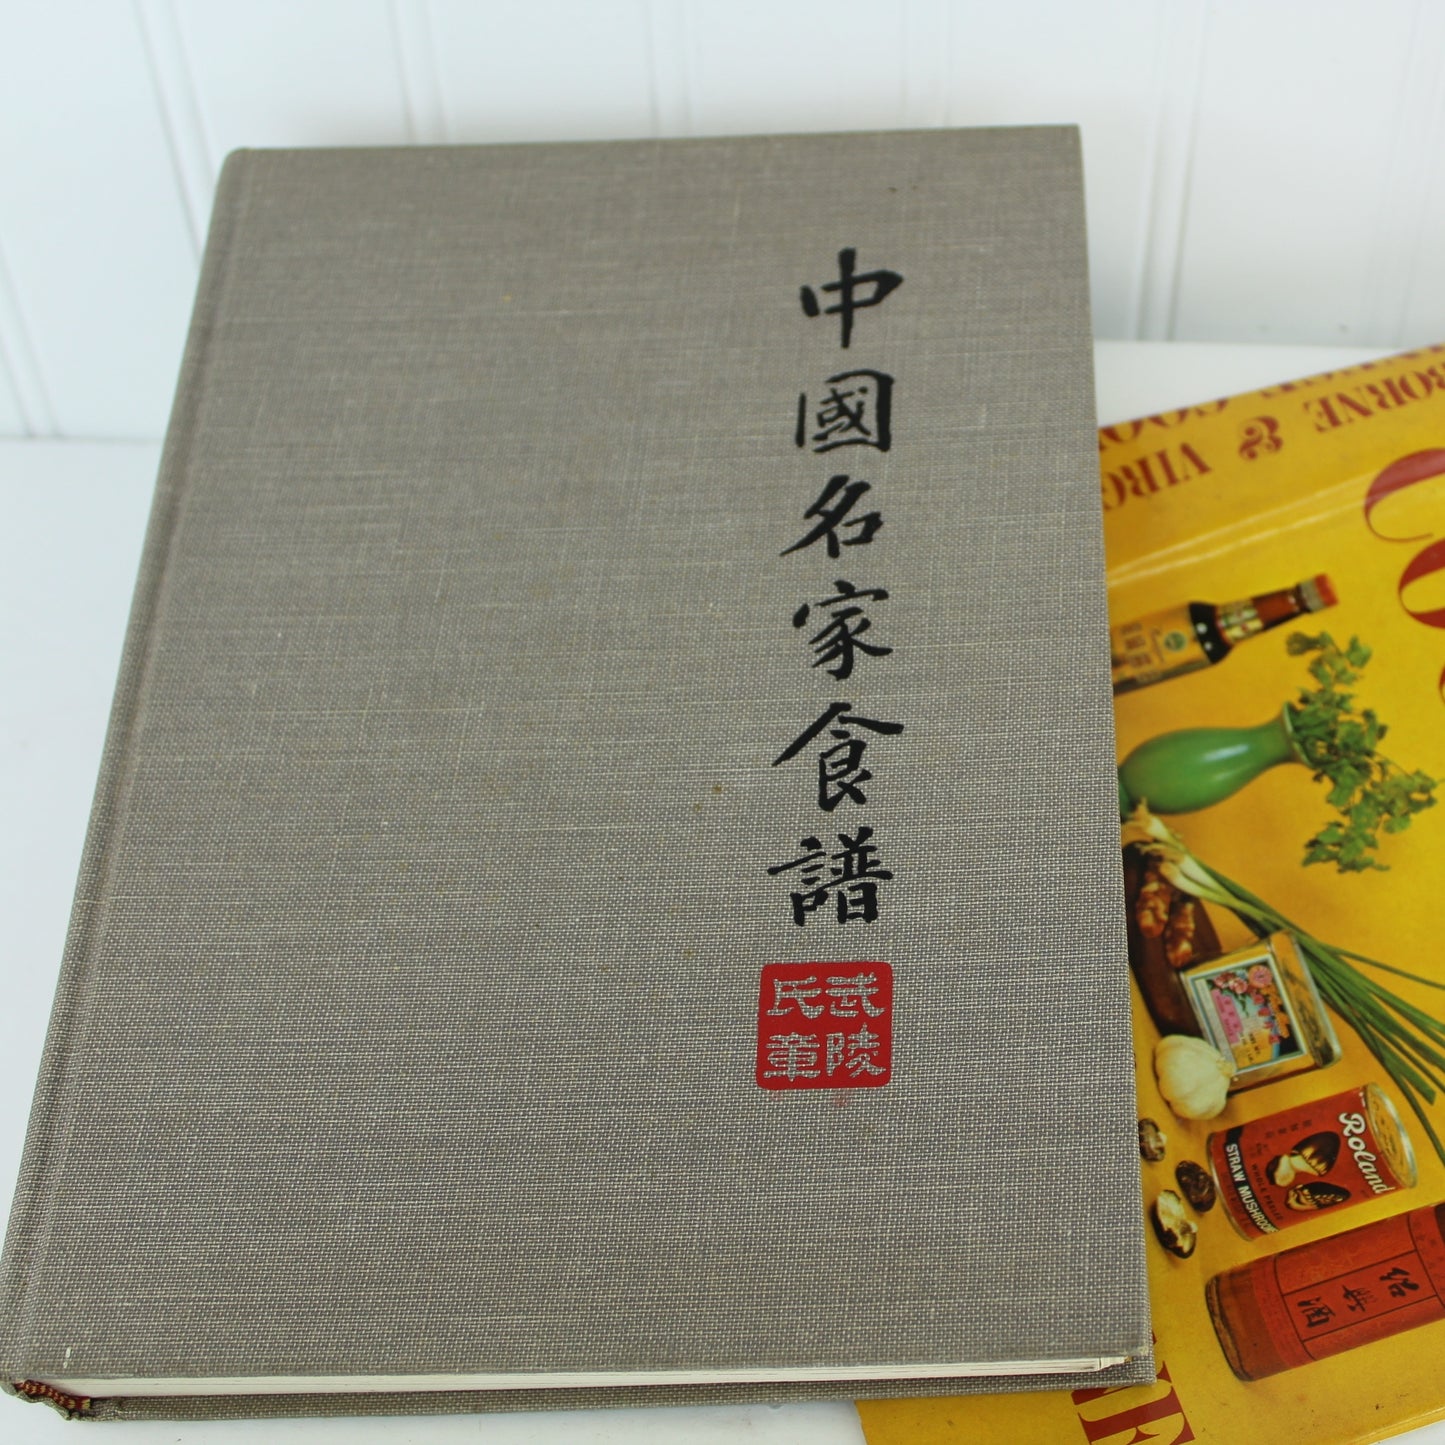 Collection 2 Classic Vtg Cookbooks Chinese Cookbook Claiborne 1972 & French Cooking Woman's Day 1969 good vintage condition